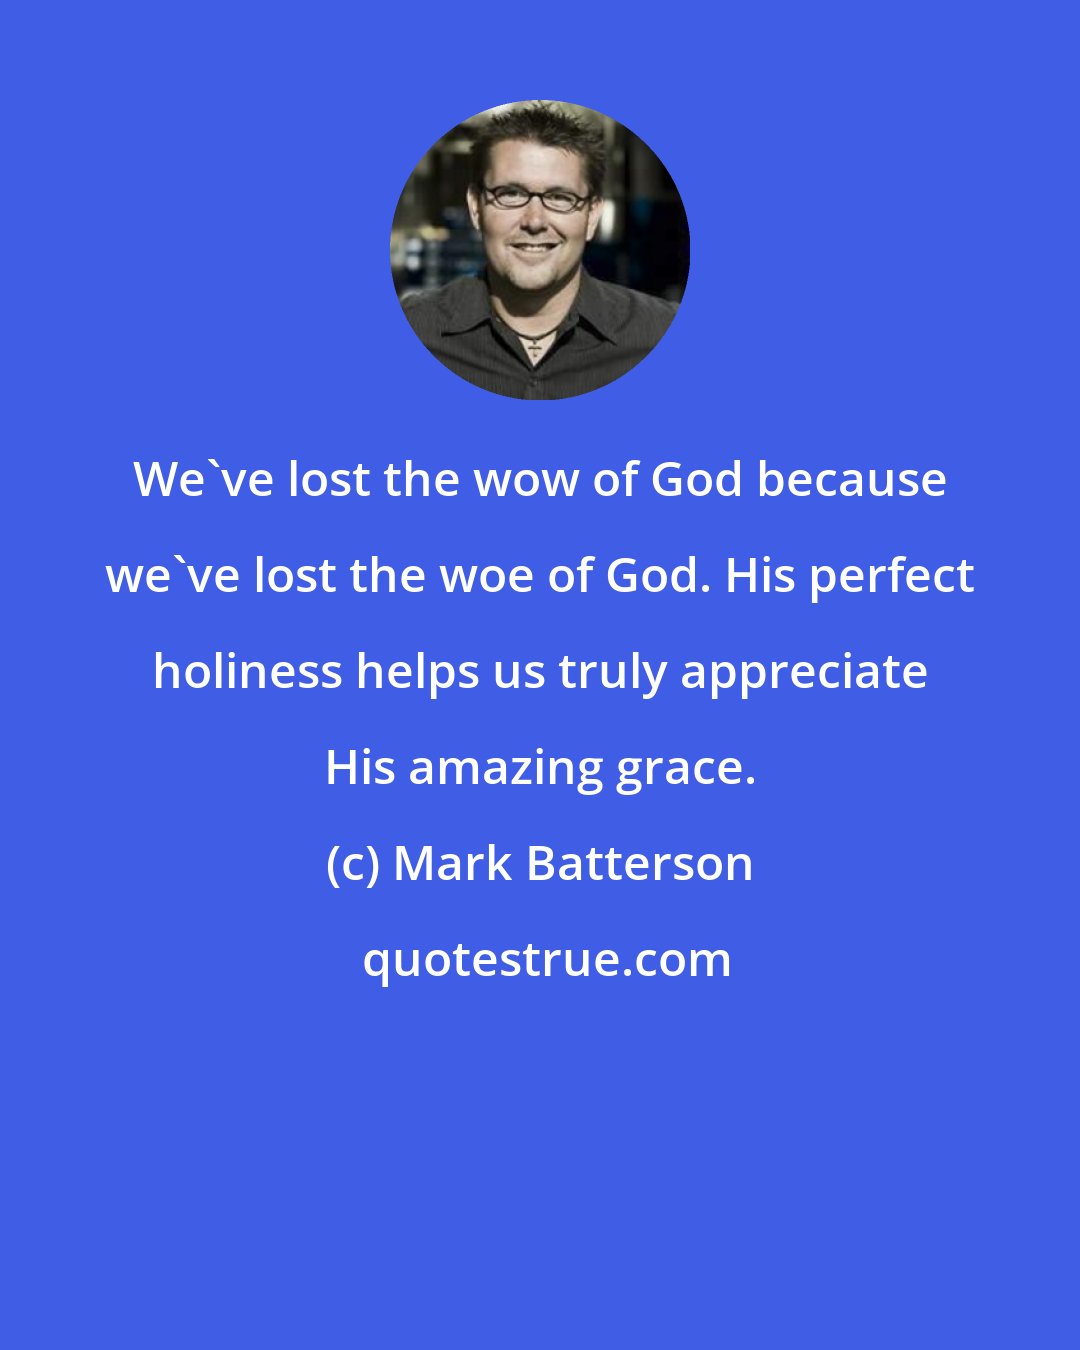 Mark Batterson: We've lost the wow of God because we've lost the woe of God. His perfect holiness helps us truly appreciate His amazing grace.